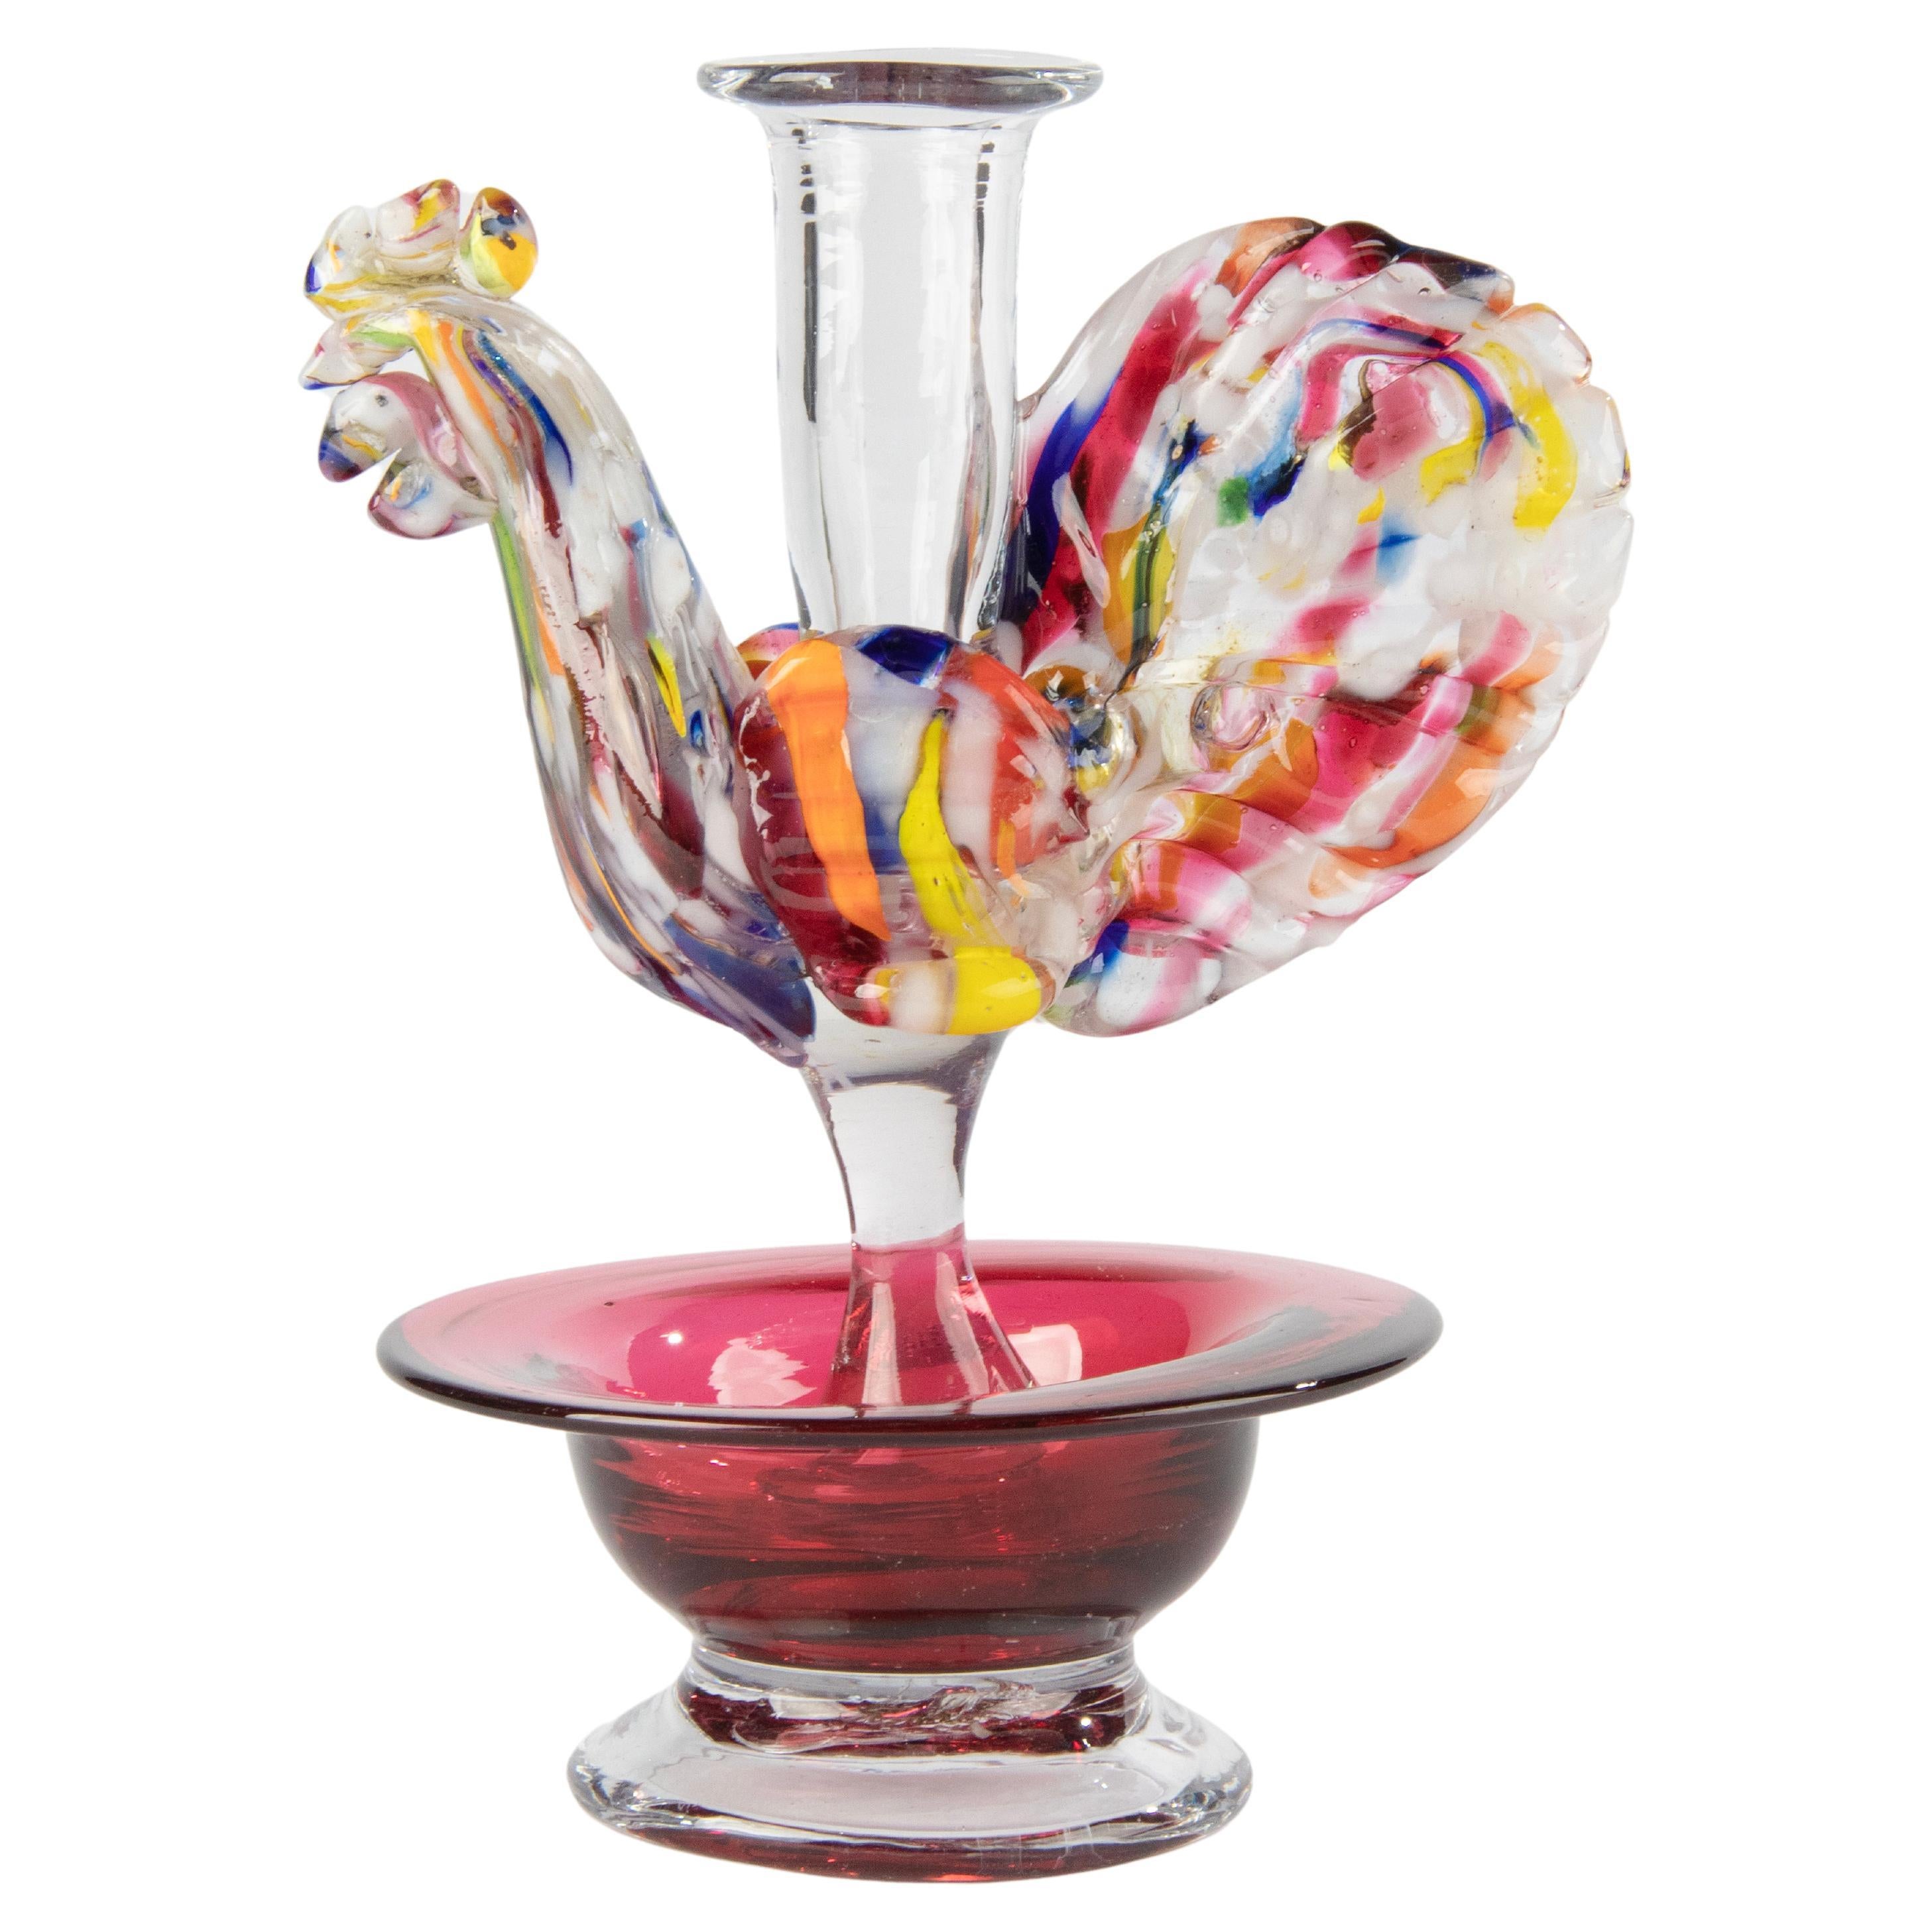 How can you tell if a glass rooster is Murano?